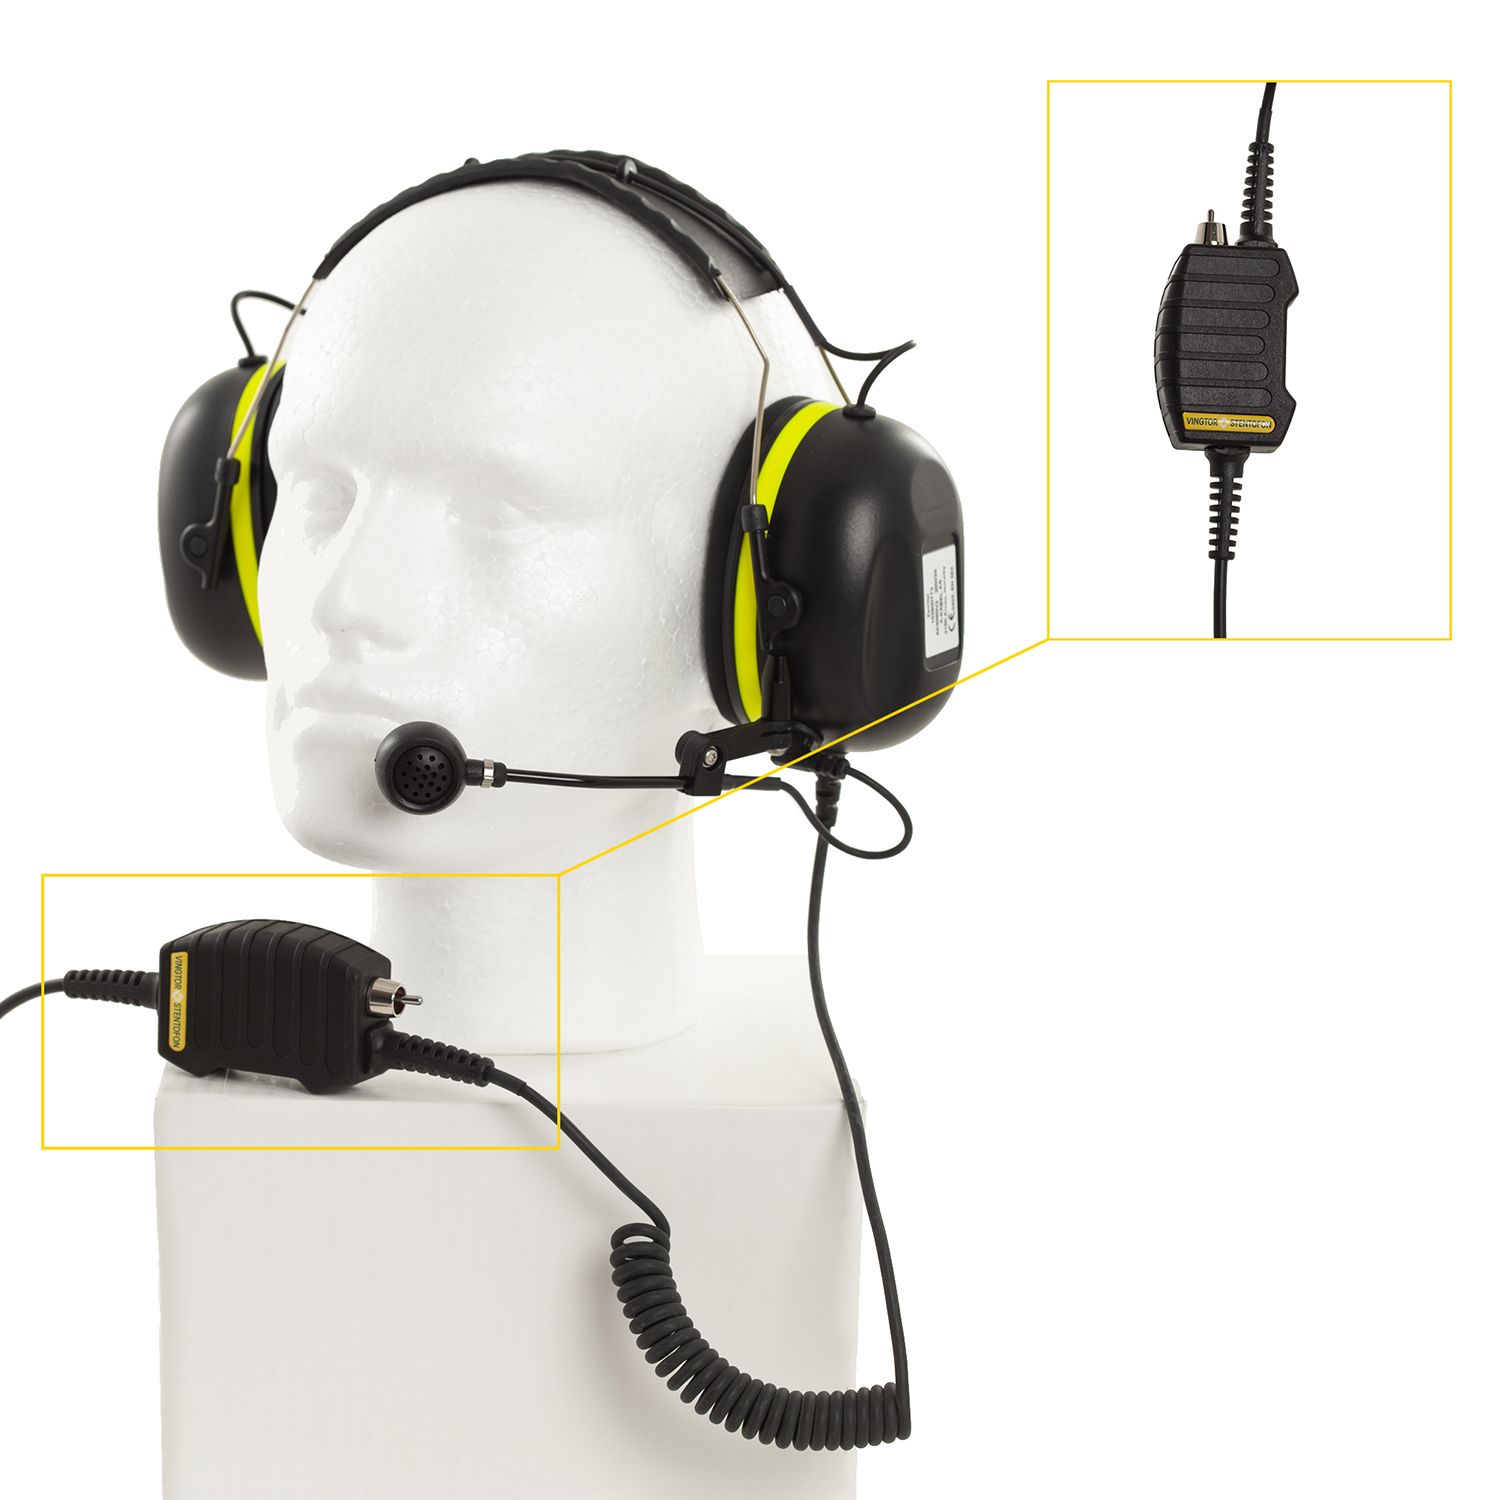 1020600774 VSP36PELPA20 Portable headset w/boom mic. on/off switch box and 20M cable